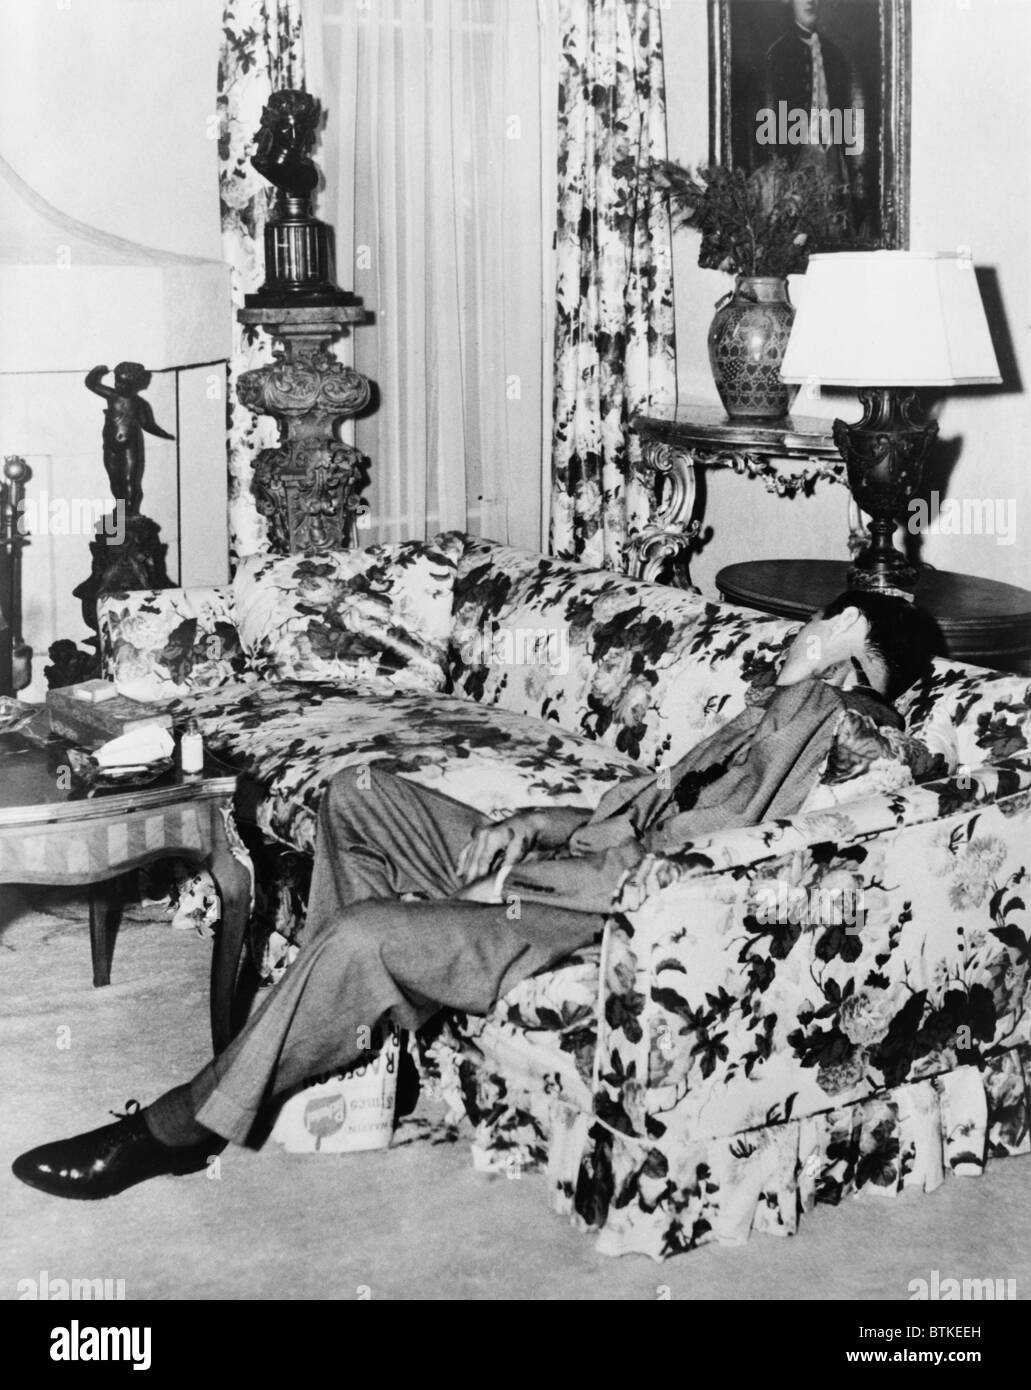 Benny 'Bugsy' Siegel (1906-1947), shot dead on the sofa of Beverly Hills home on June 20, 1947.  His partner in the development Stock Photo